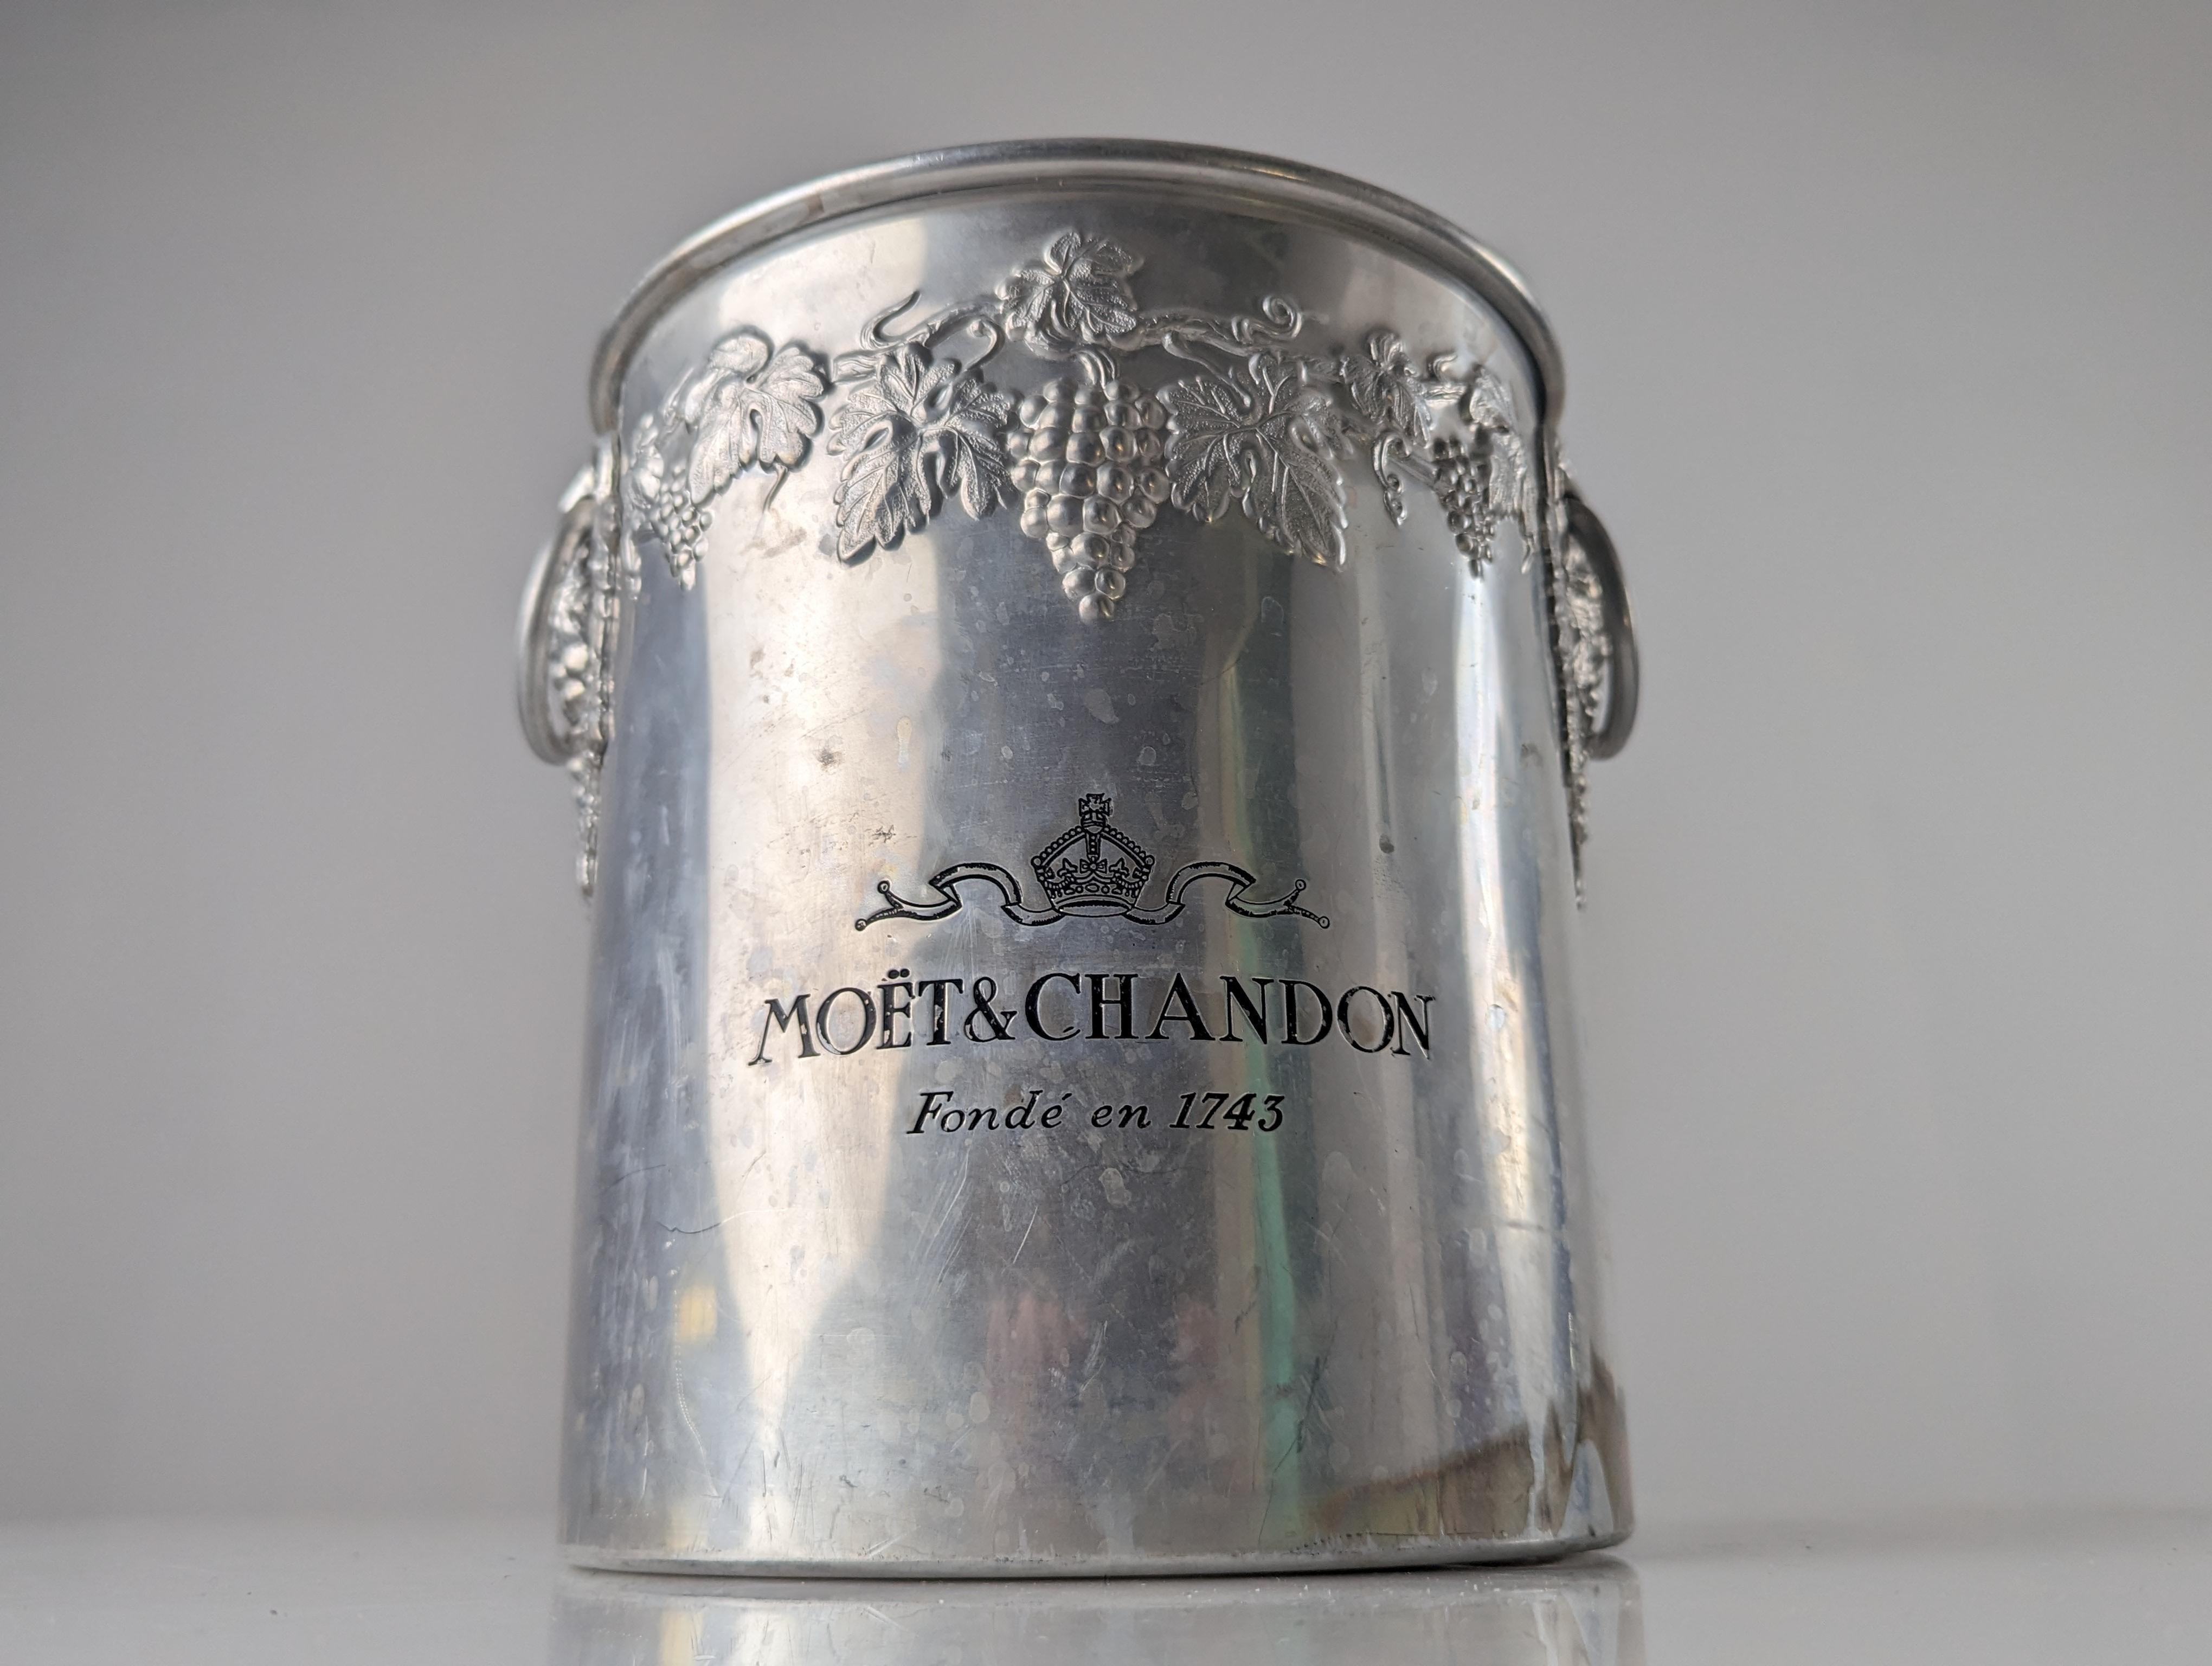 Elegant champagne bucket from the exclusive brand MOET & CHANDON with a beautiful floral decoration of a vine with bunches of grapes surrounding the top.